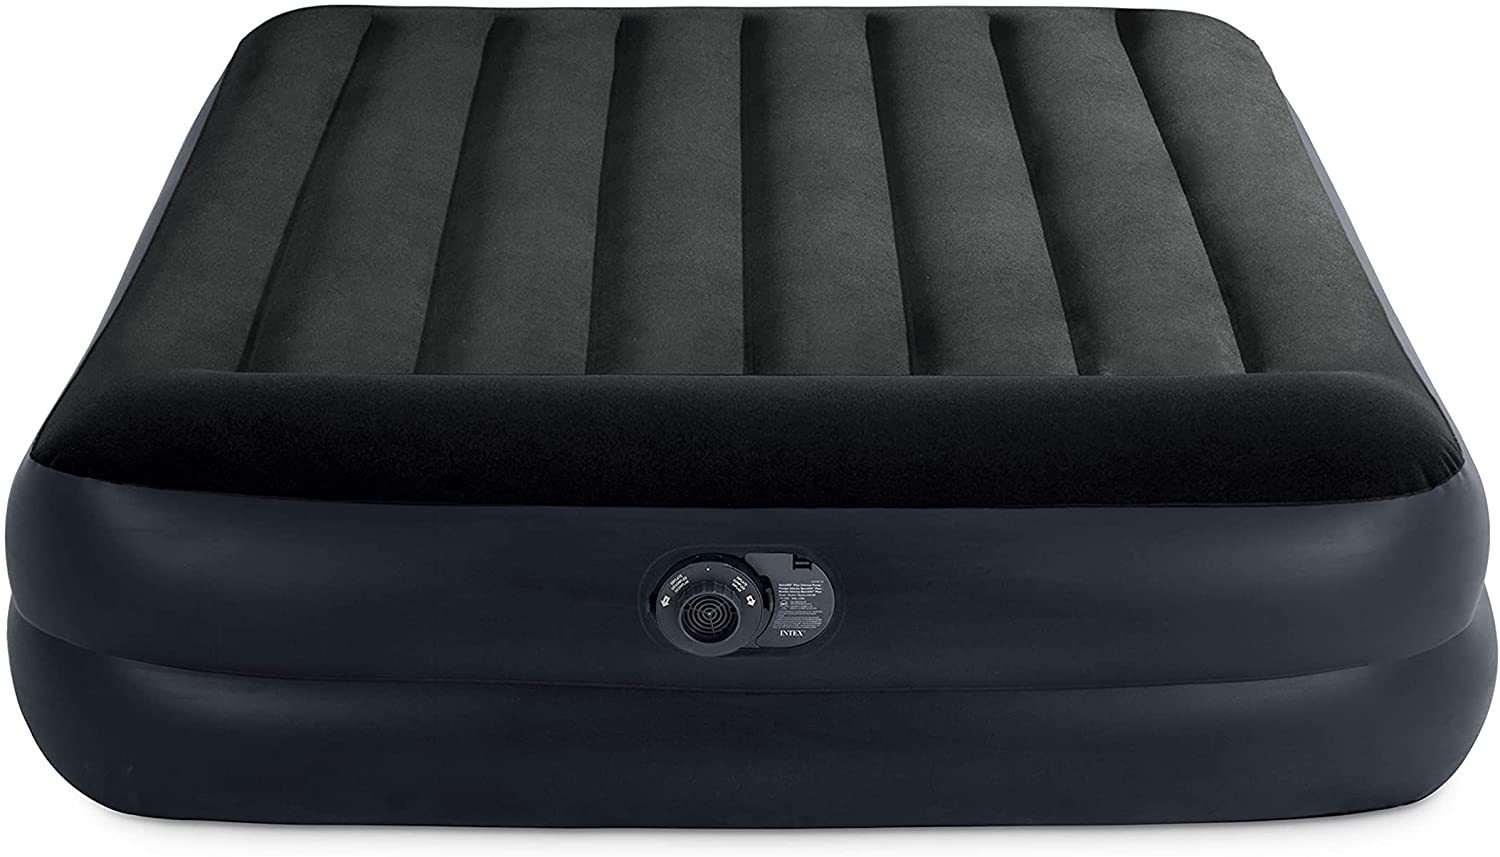 An airbed like this one, offers plenty of cushioning but is less portable than a sleeping pad.